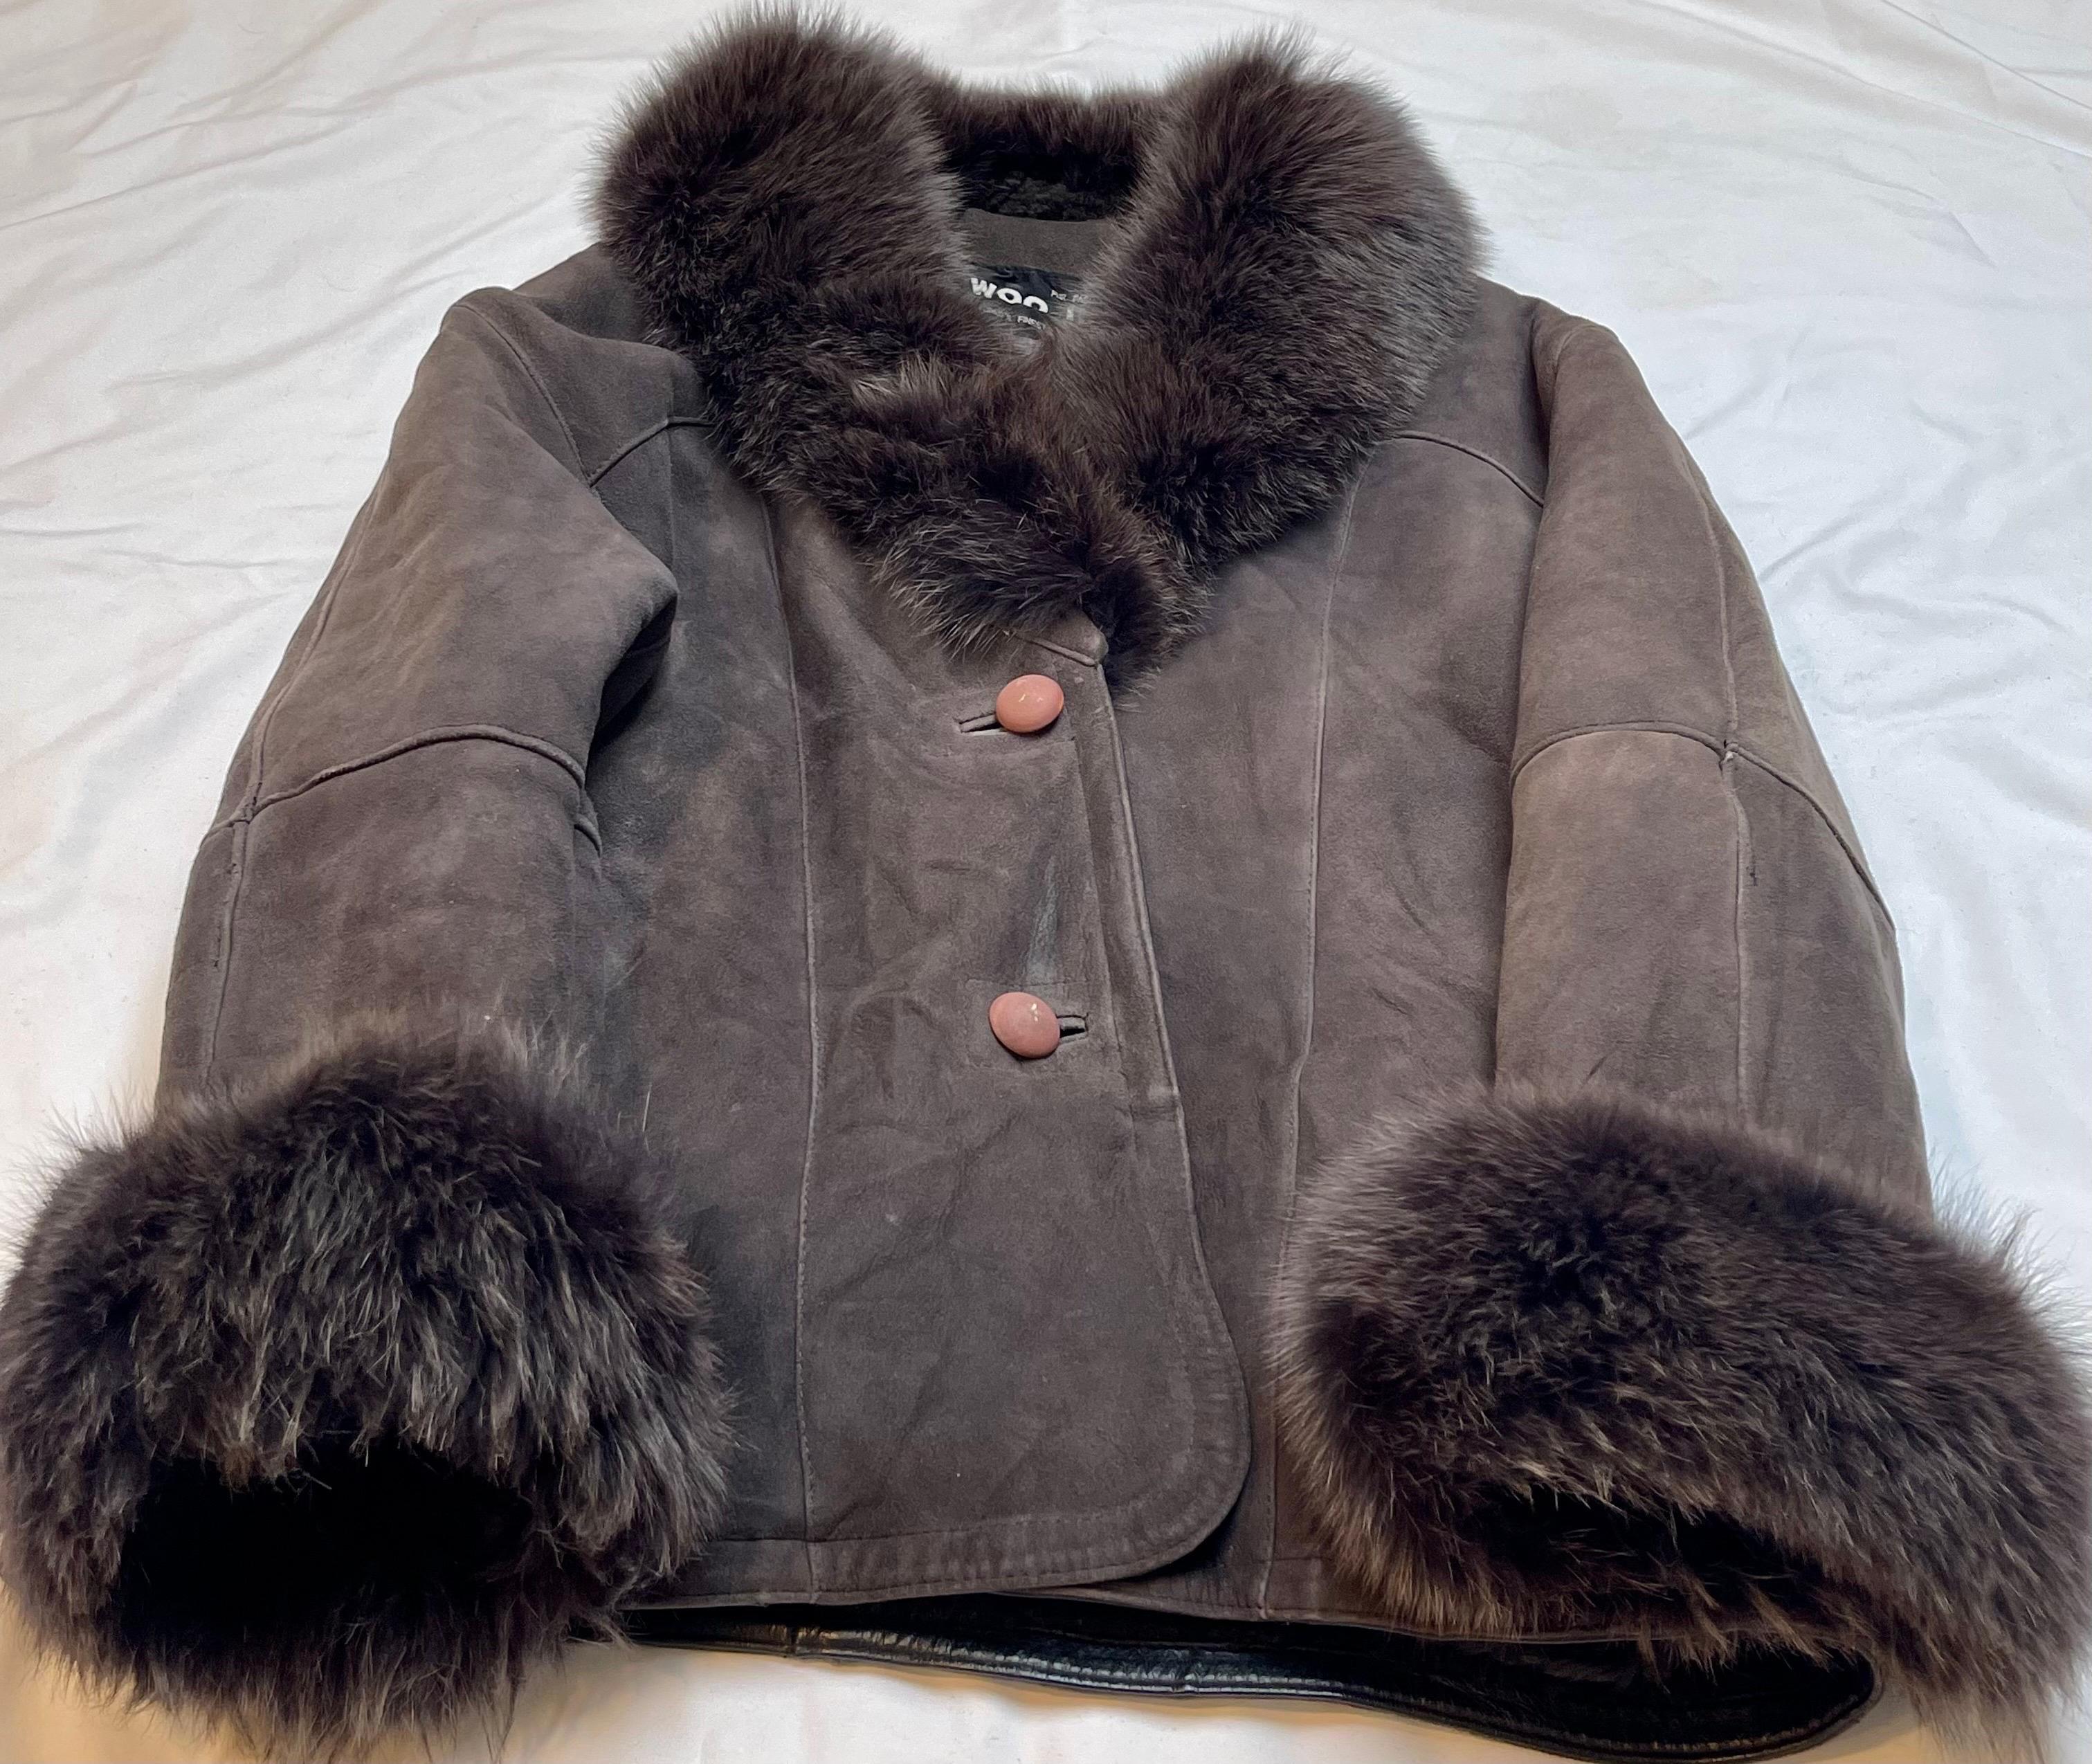   High Country Shearling Sheepskin Coat excellent condition Real Fur 4